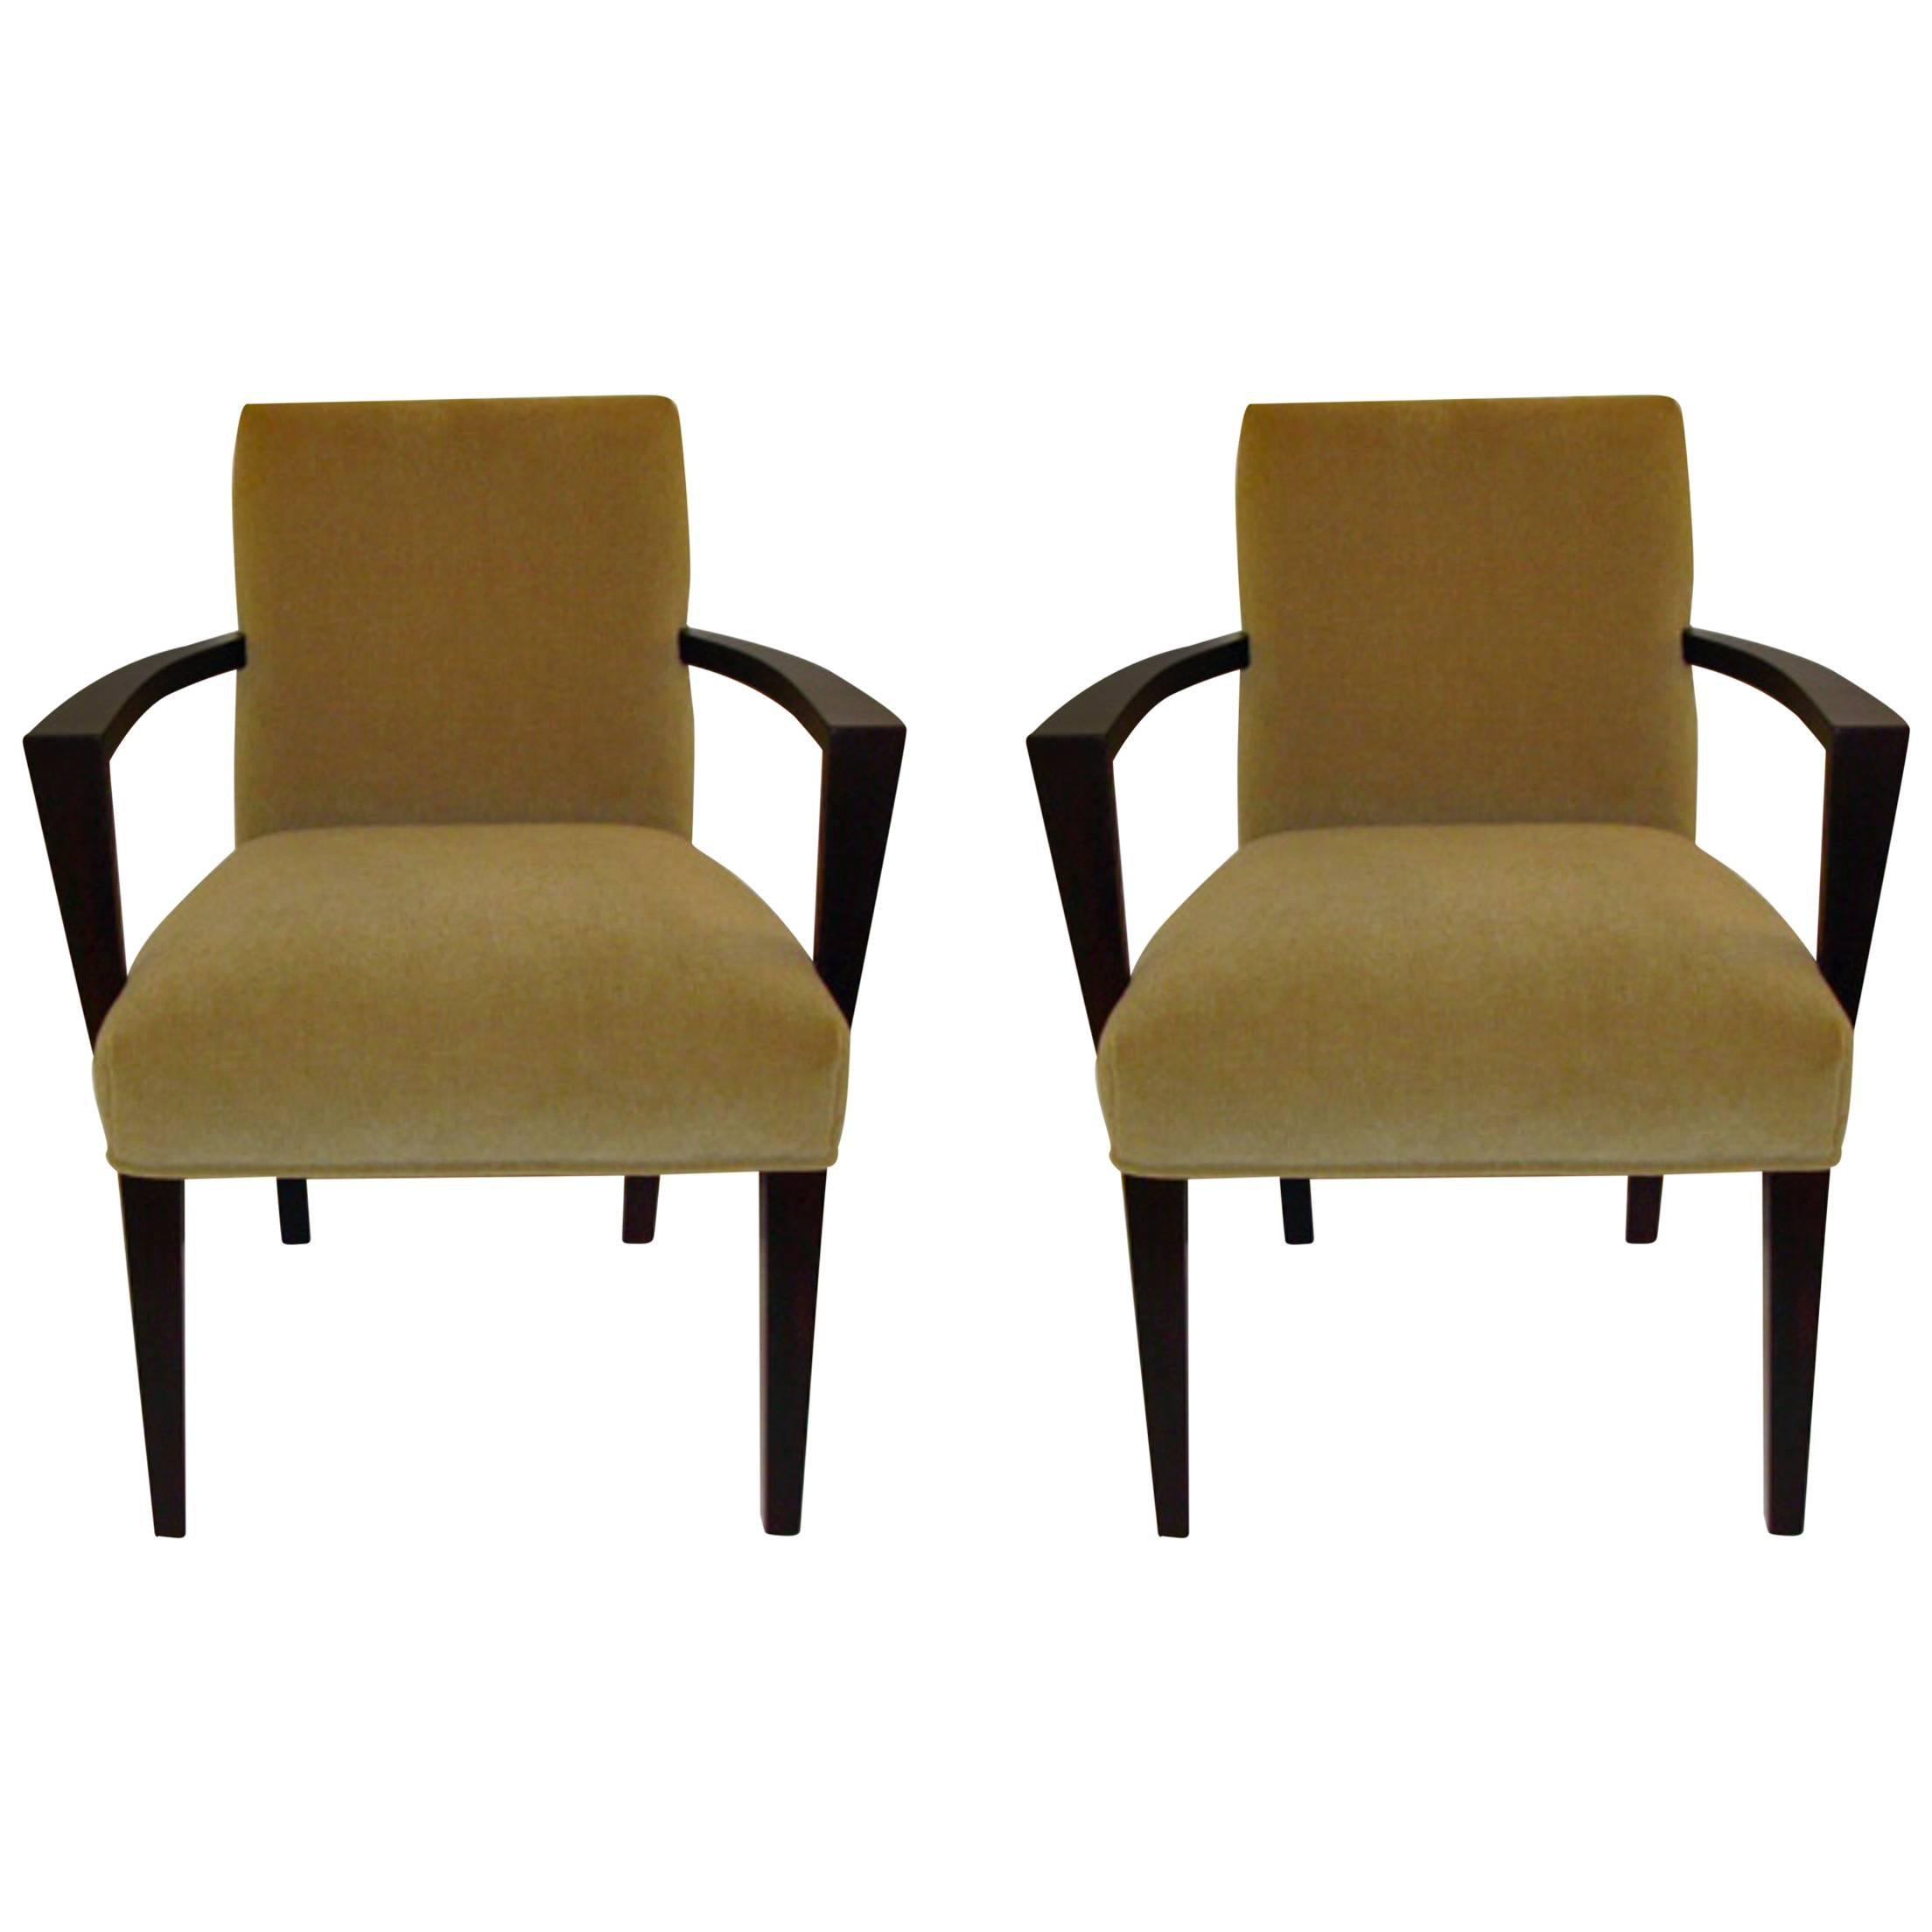 Pair of Vintage Modernage Armchairs For Sale